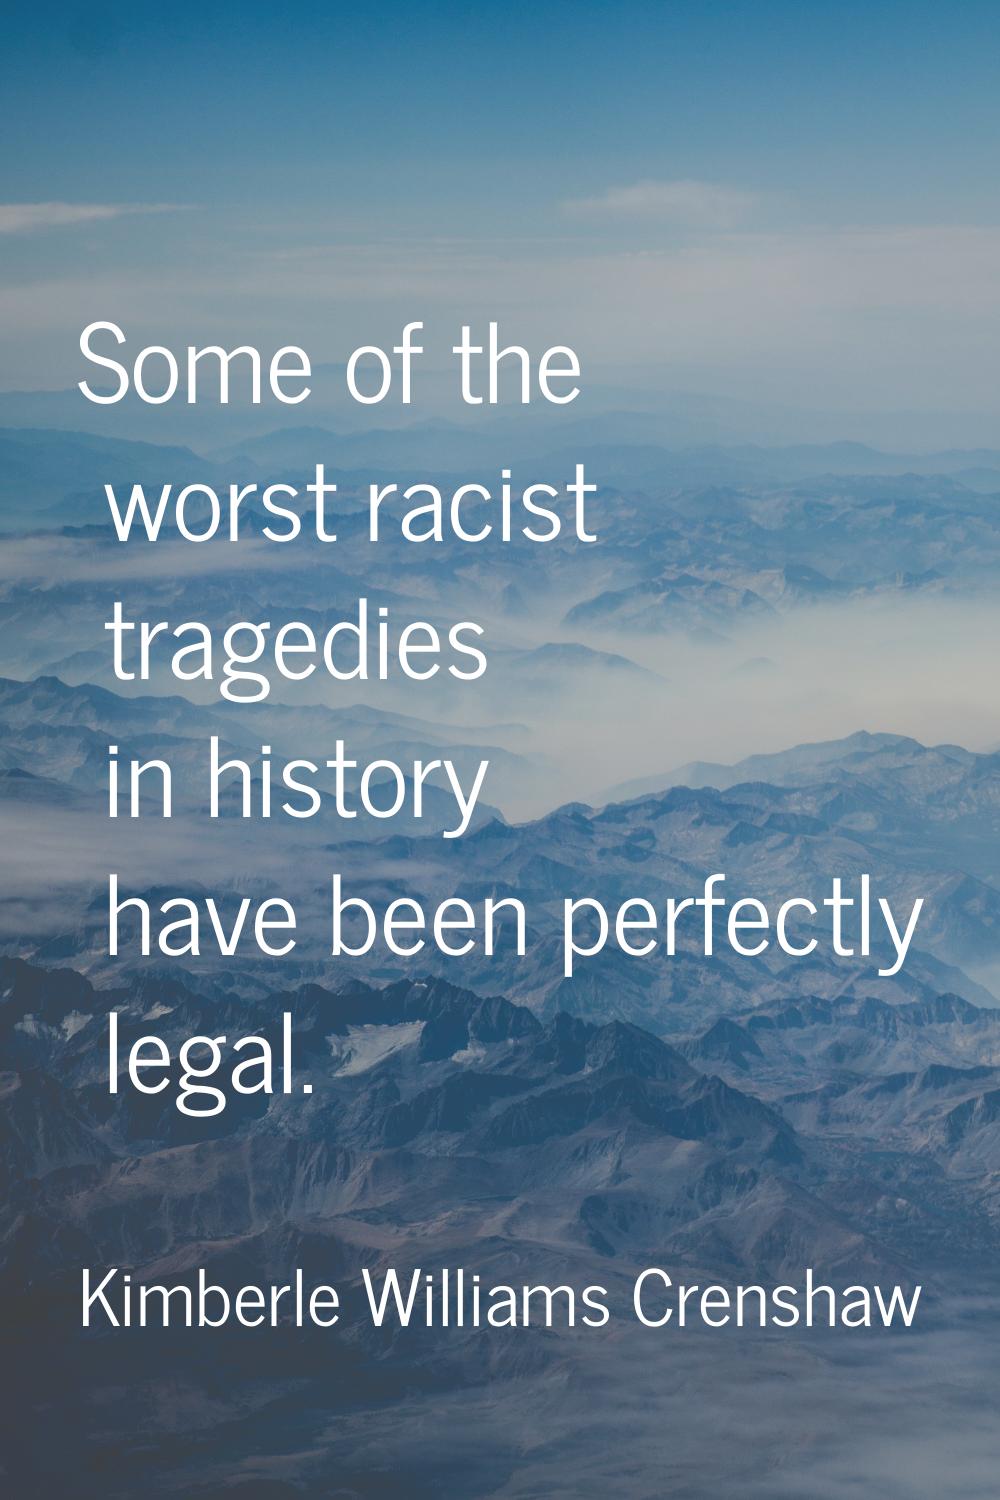 Some of the worst racist tragedies in history have been perfectly legal.